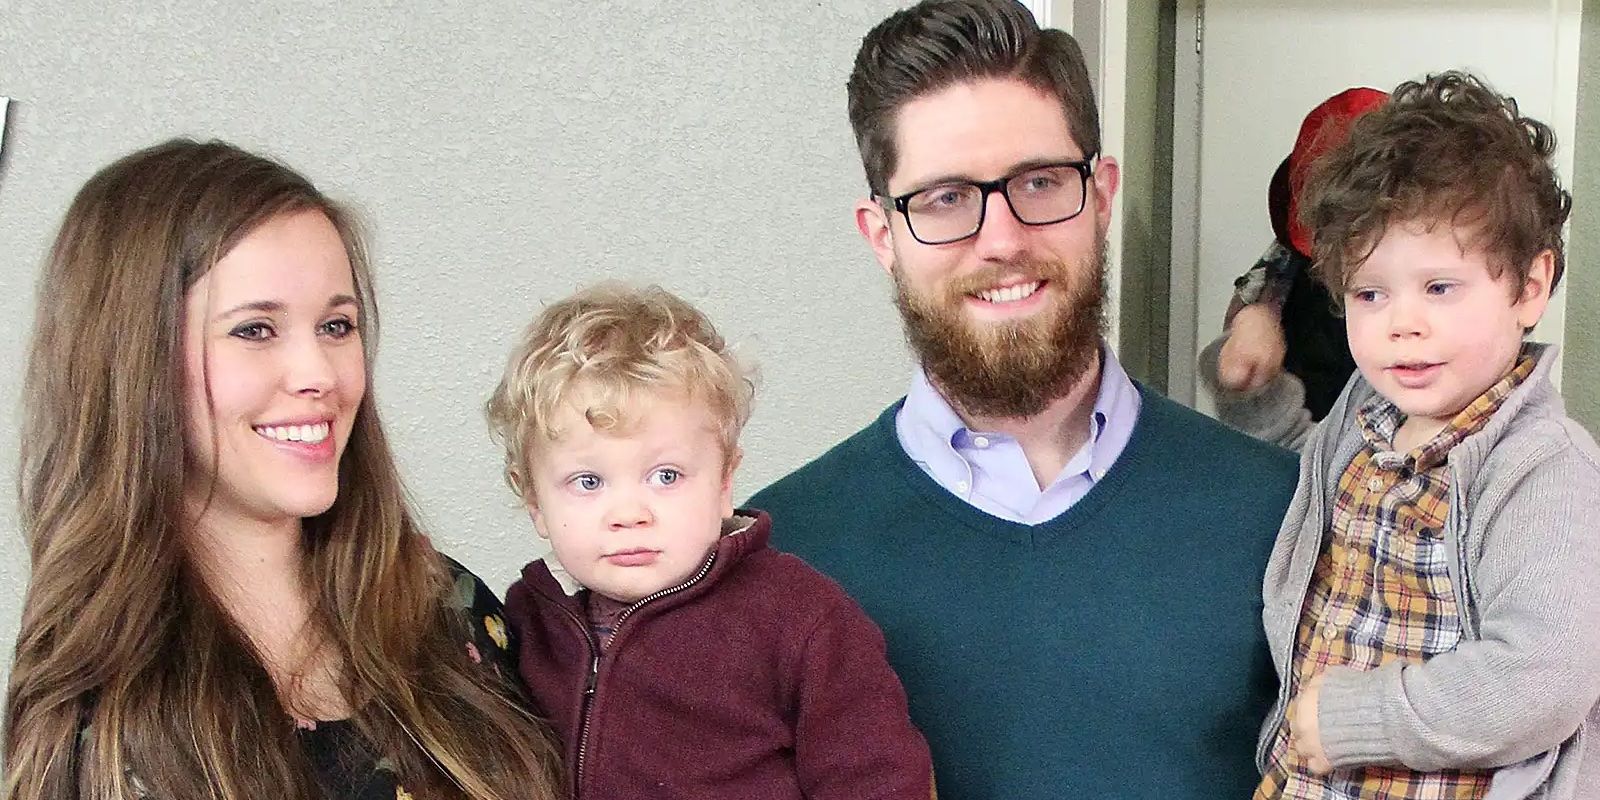 Jessa Duggar from 19 Kids and Counting smiling with her husband and sons